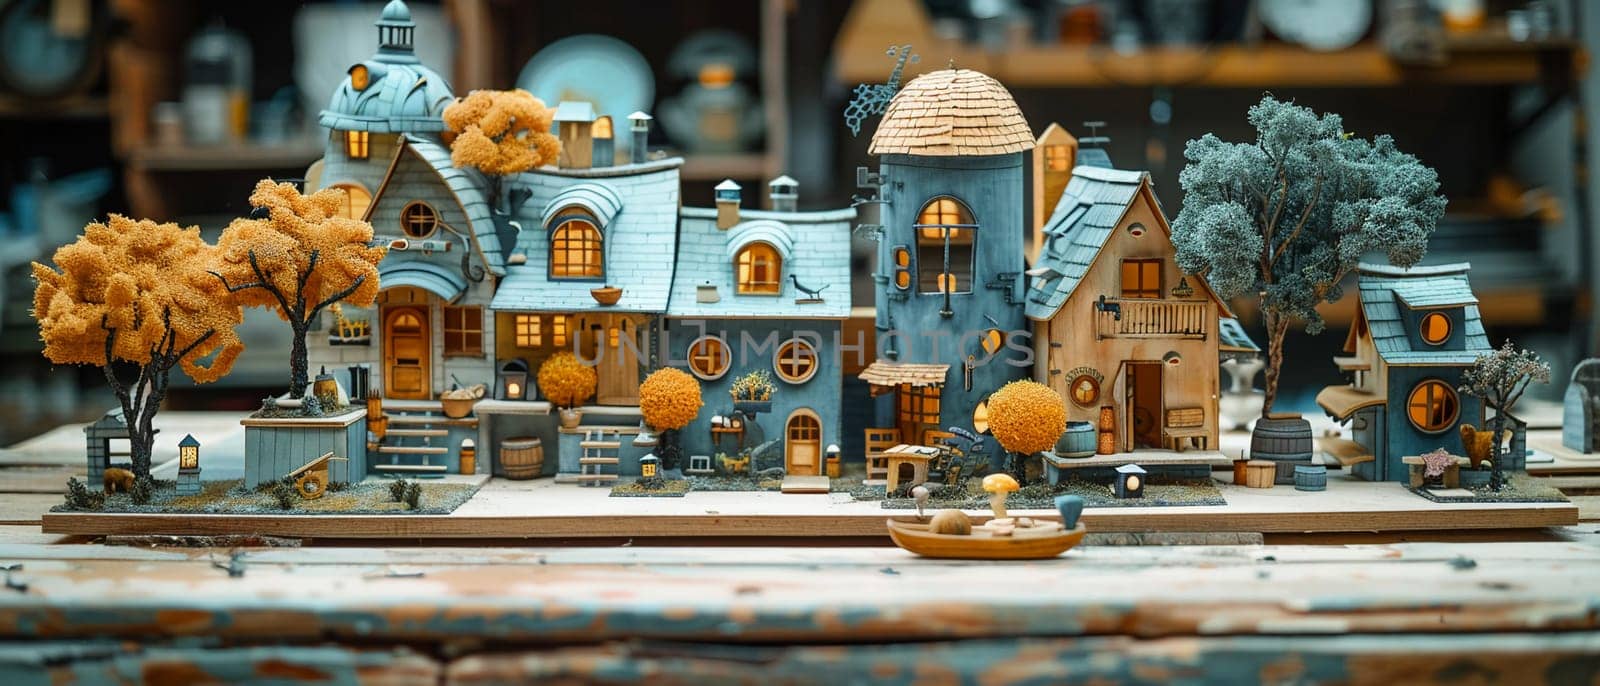 Handcrafted Toy Workshop Brings Imagination to Life in Business of Playful Creations, Toy blueprints and painted figures bring a story of imagination and craftsmanship to life in the handcrafted toy workshop business.